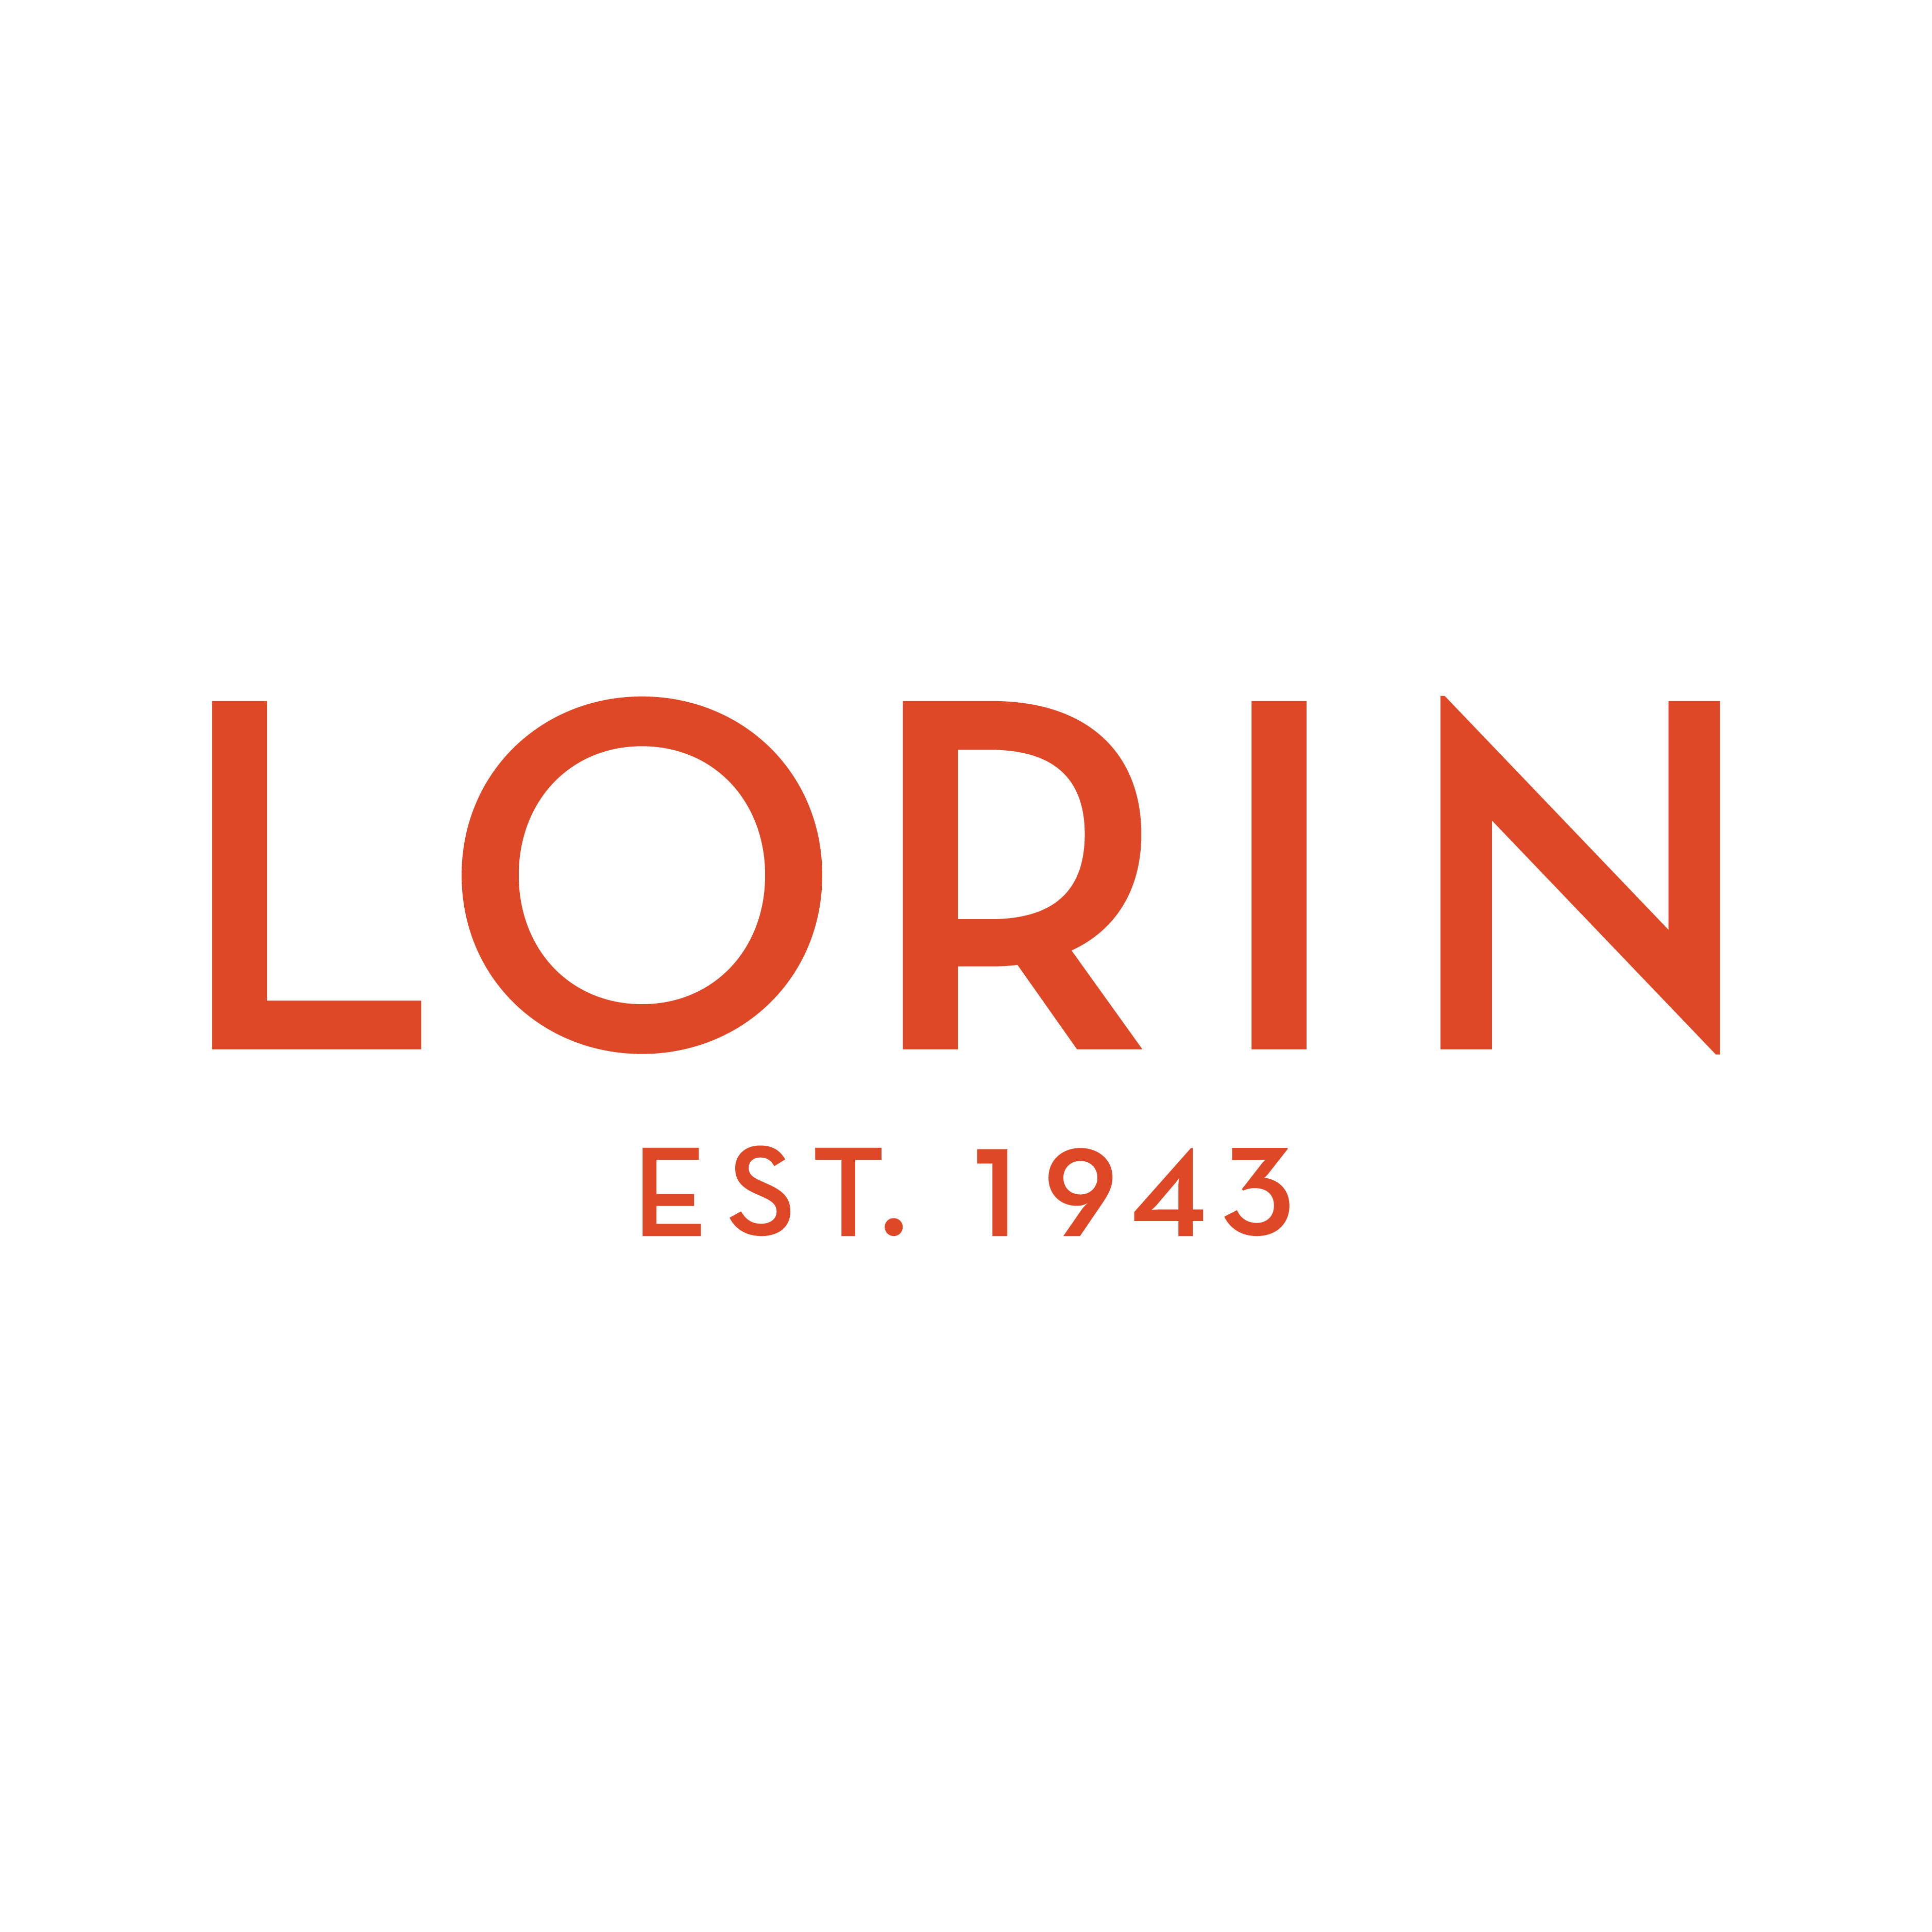 Peopledesign-lorin logo design by logo designer Peopledesign for your inspiration and for the worlds largest logo competition